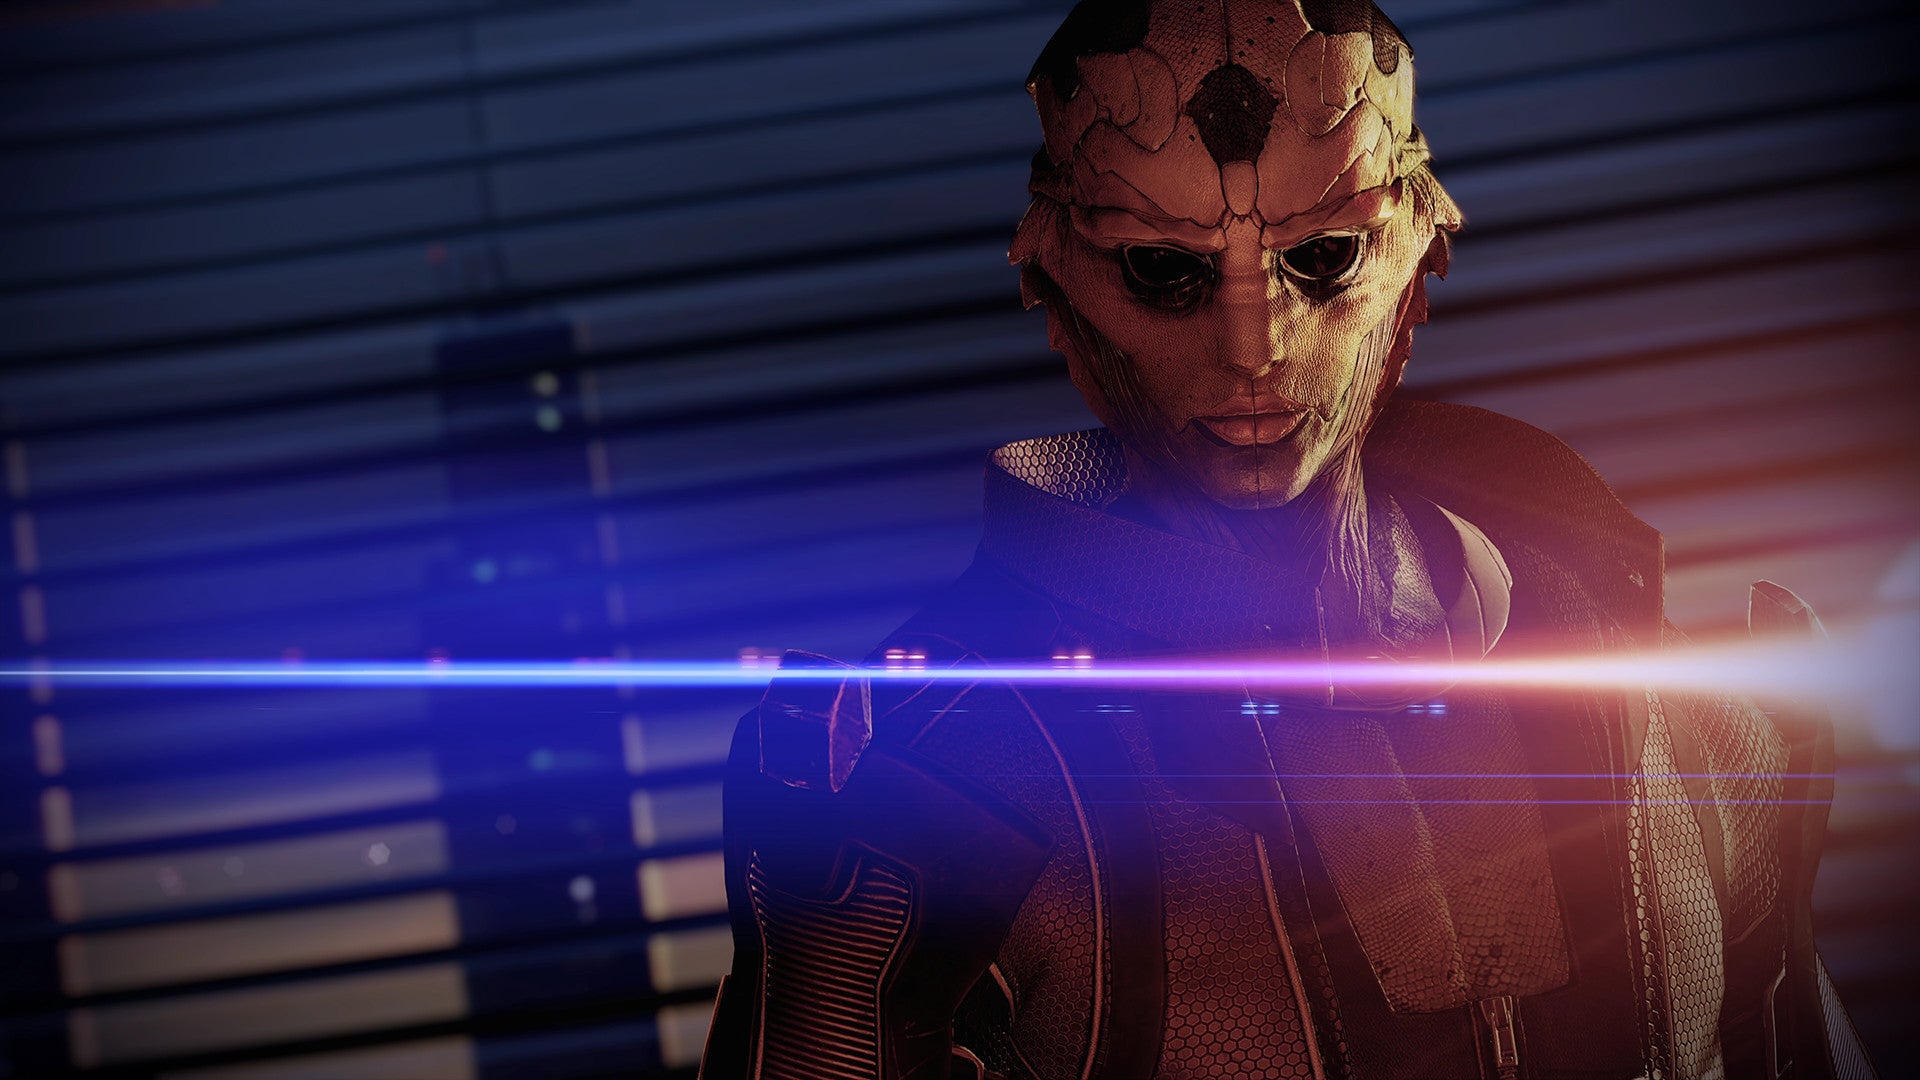 All three remastered Mass Effect games and their DLC are 90% off on Steam